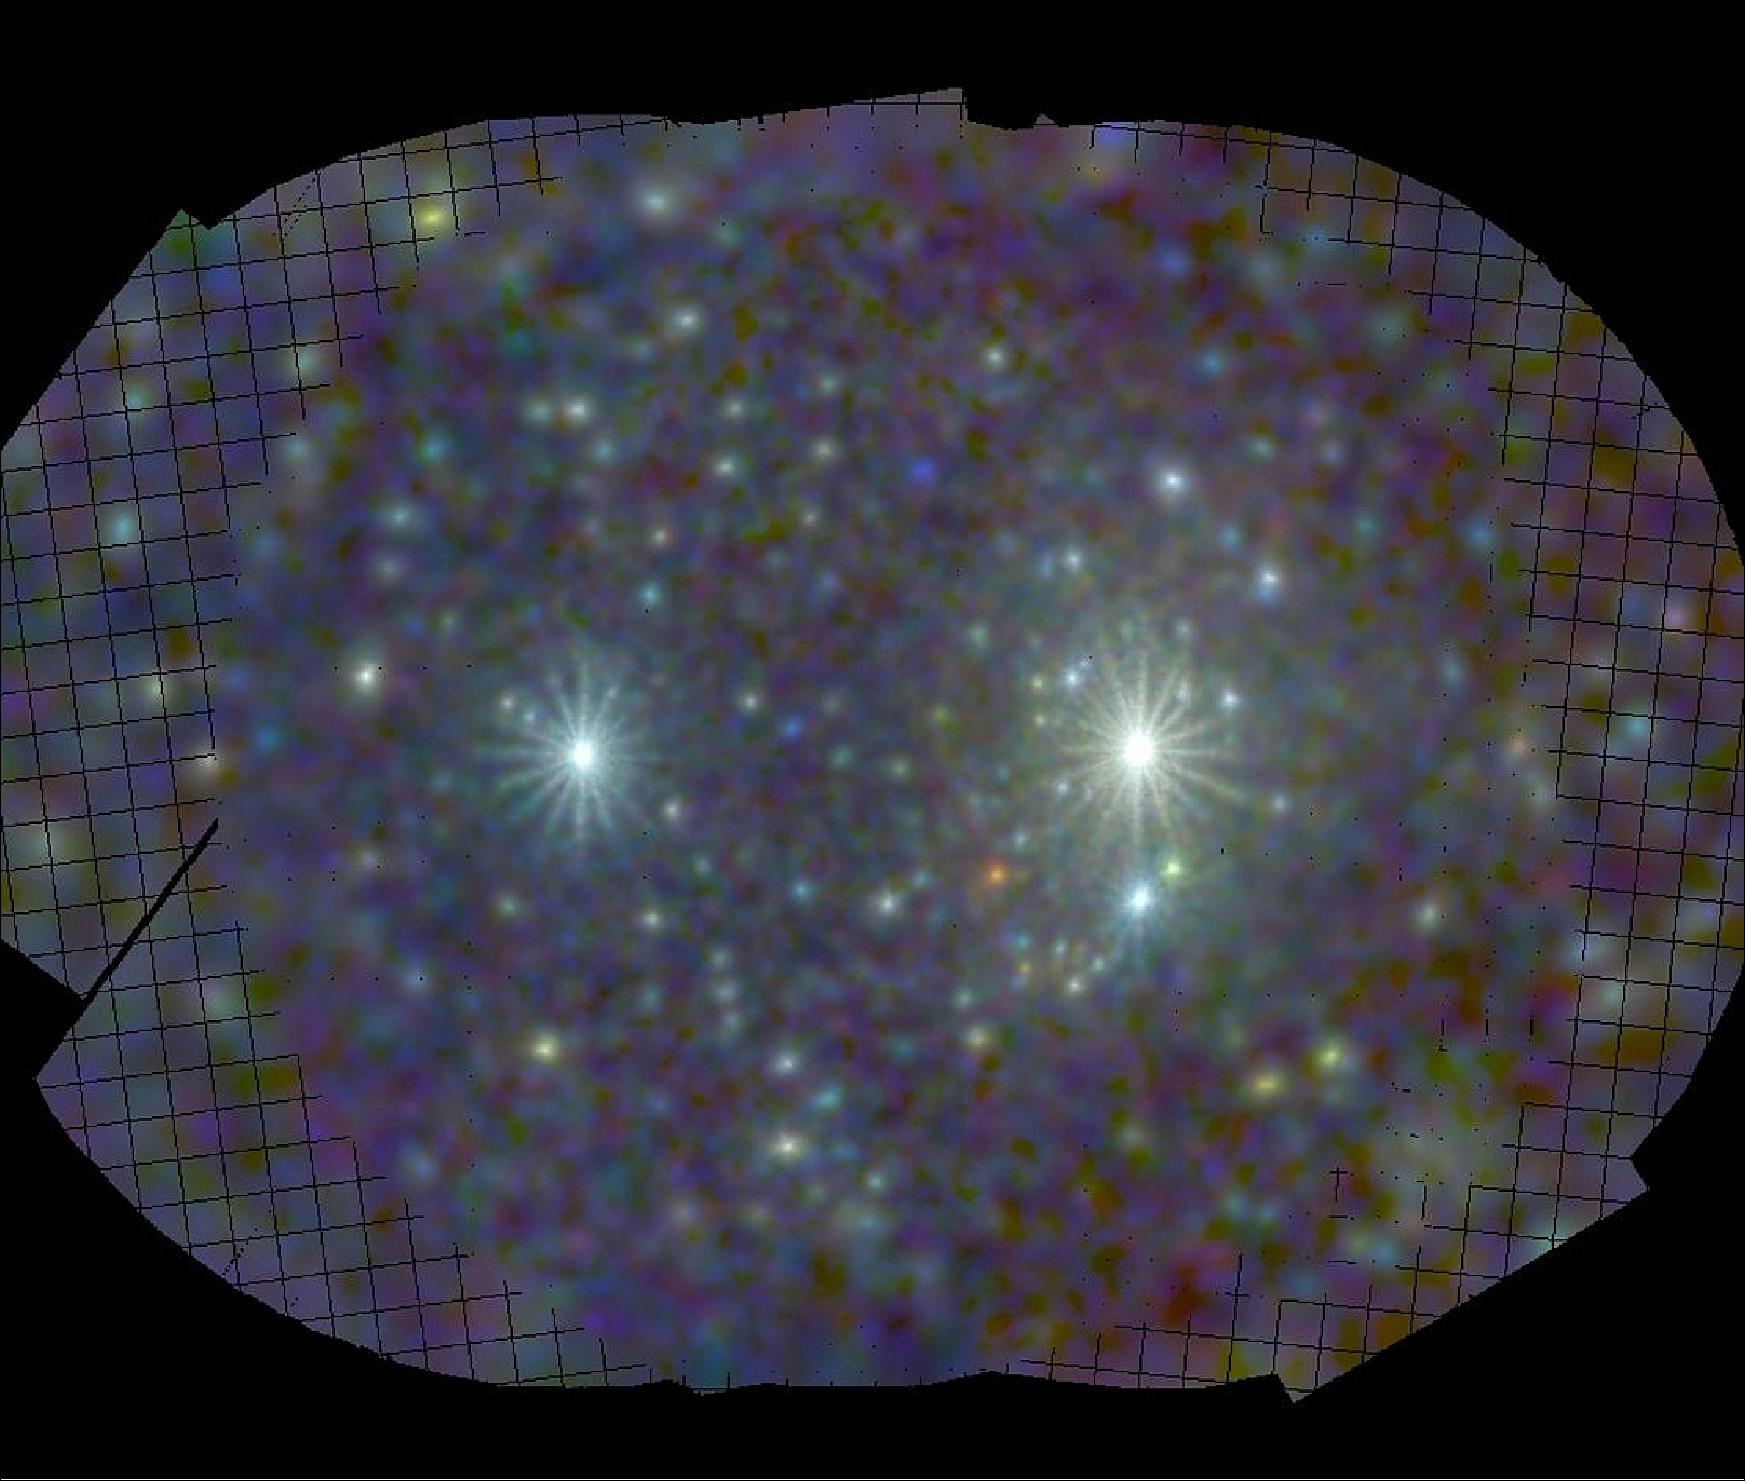 Figure 102: A familiar galaxy pair takes on an unusual appearance with bright points and delicate rays (image credit: ESA/XMM-Newton)